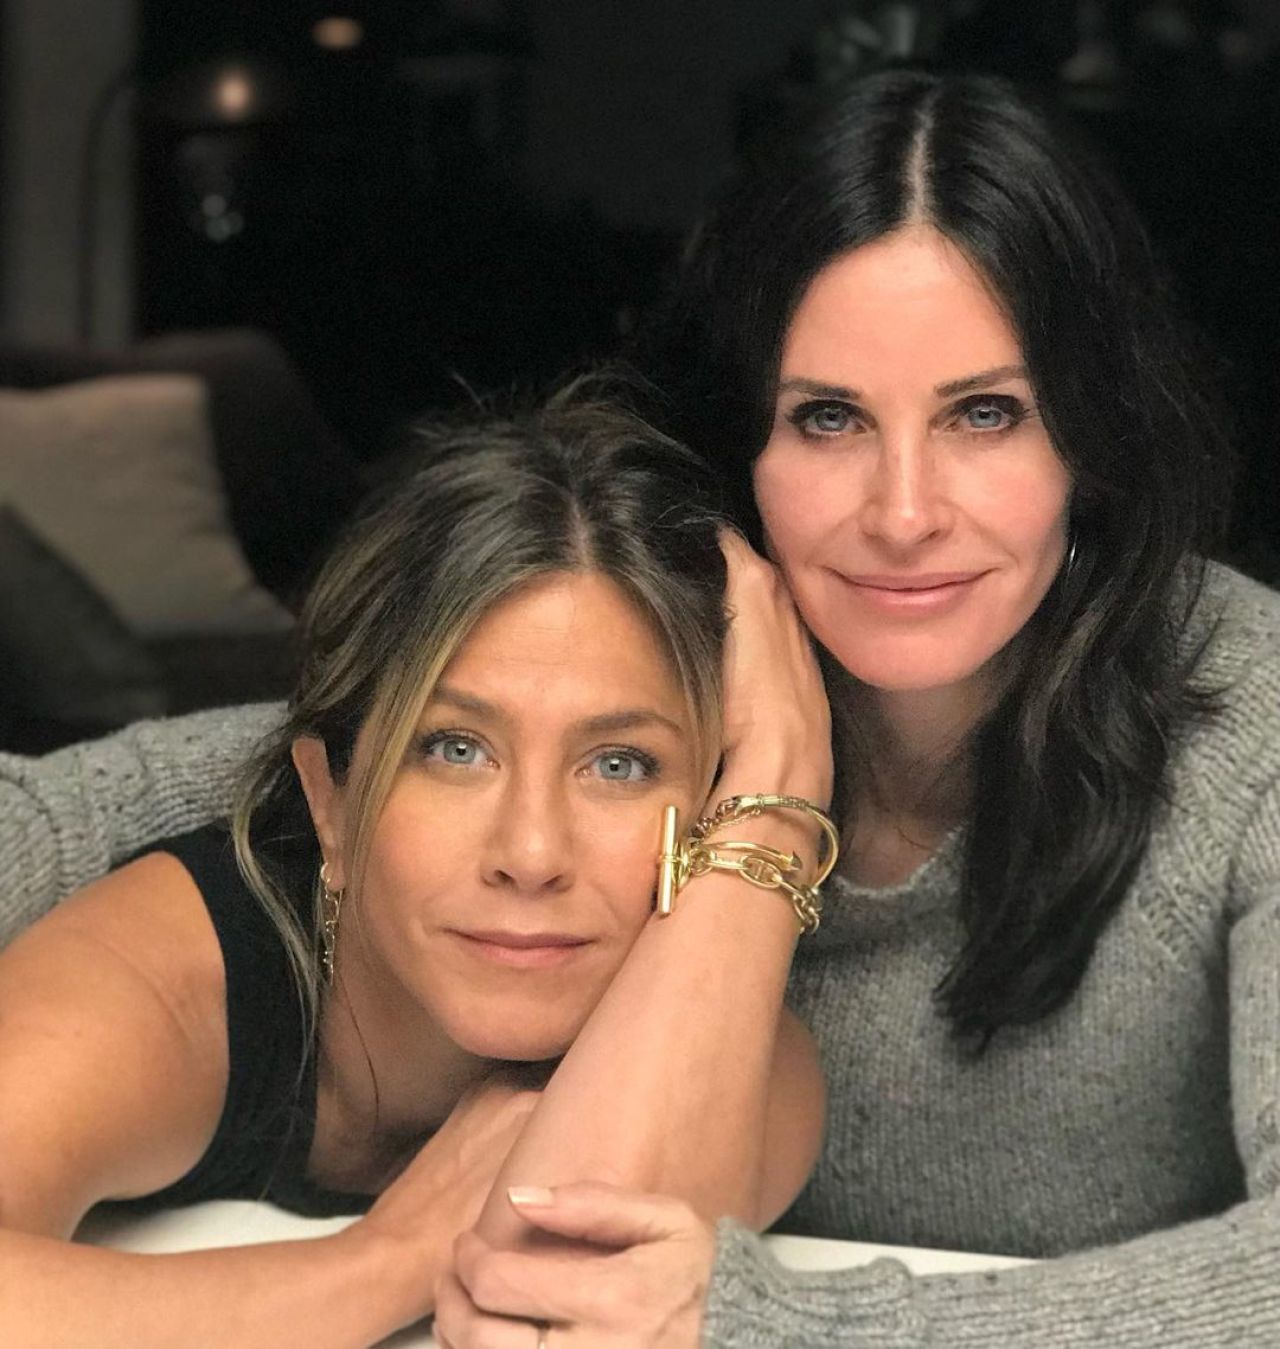 Sexy Hollywood Cougars Jennifer Aniston and Courteney Cox Together